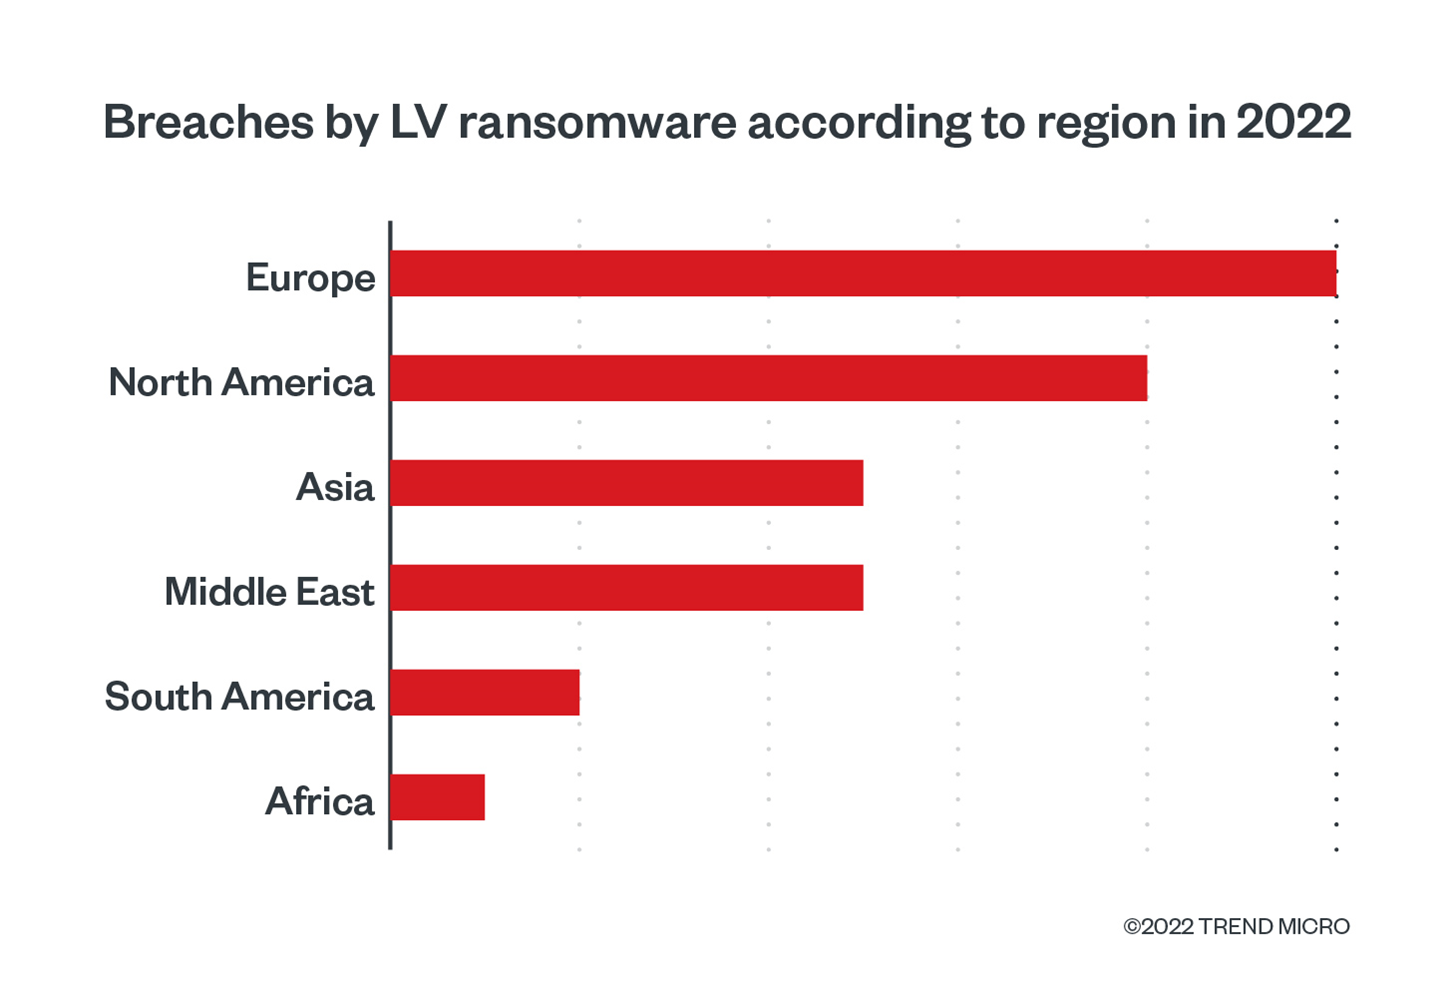 Figure 4. The regions most affected by LV ransomware in 2022